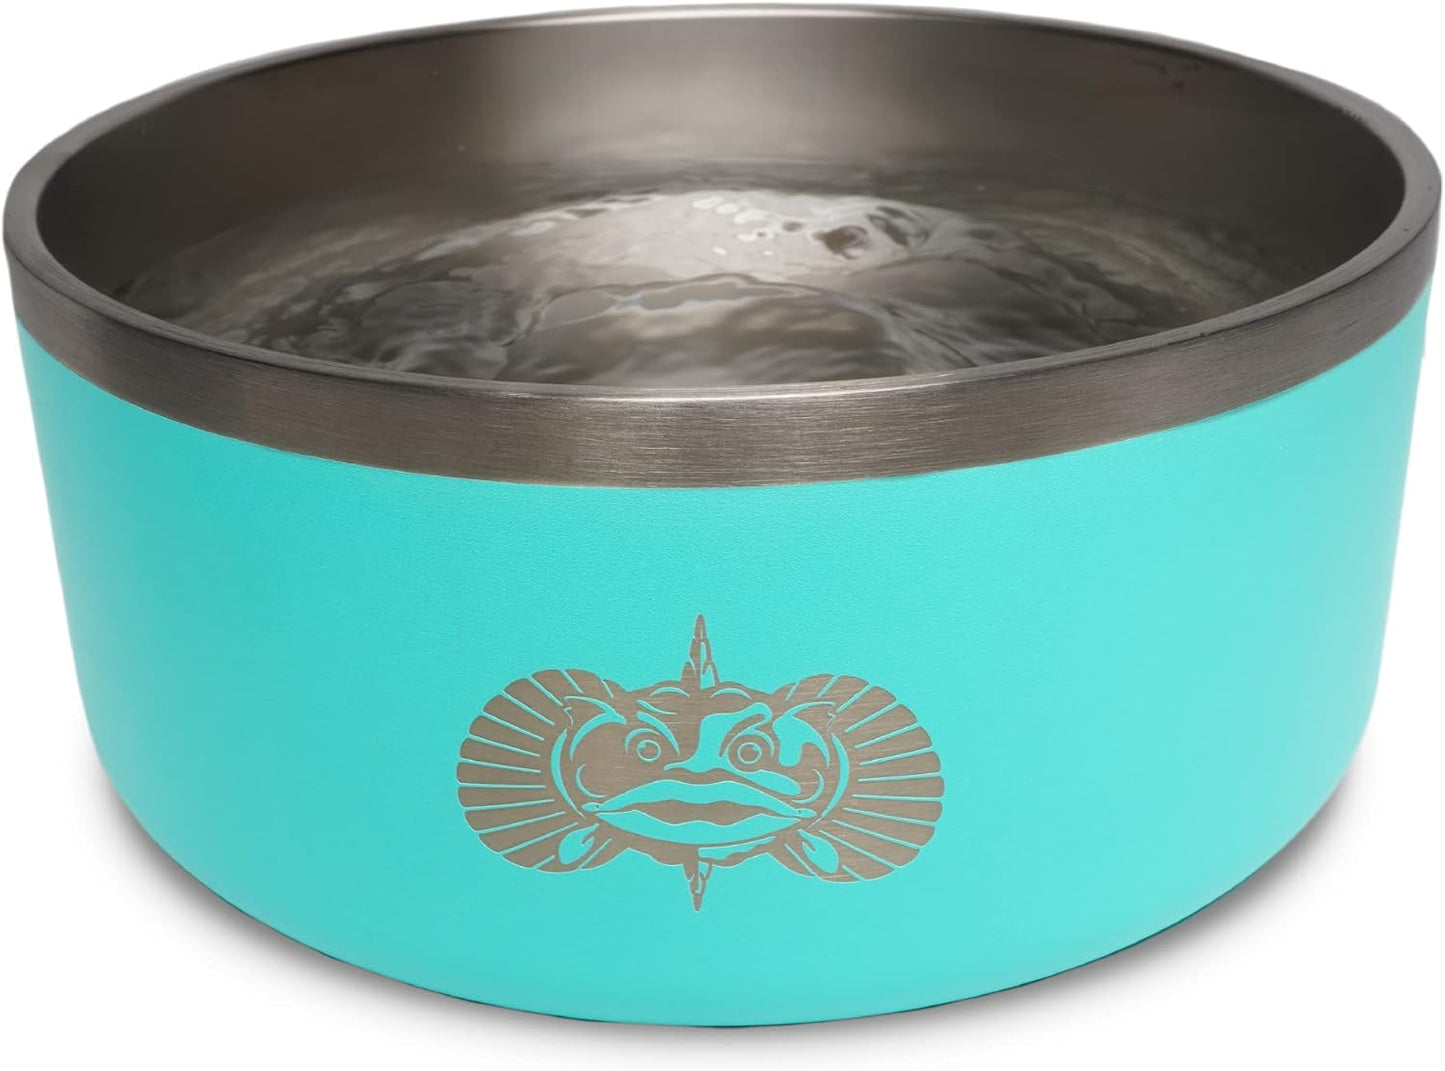 Toadfish Non-Tipping Dog Bowl - Double-Walled Stainless Steel Insulated - Smart-Grip Technology - Includes Cover - Pet Food & Water Dish - Teal